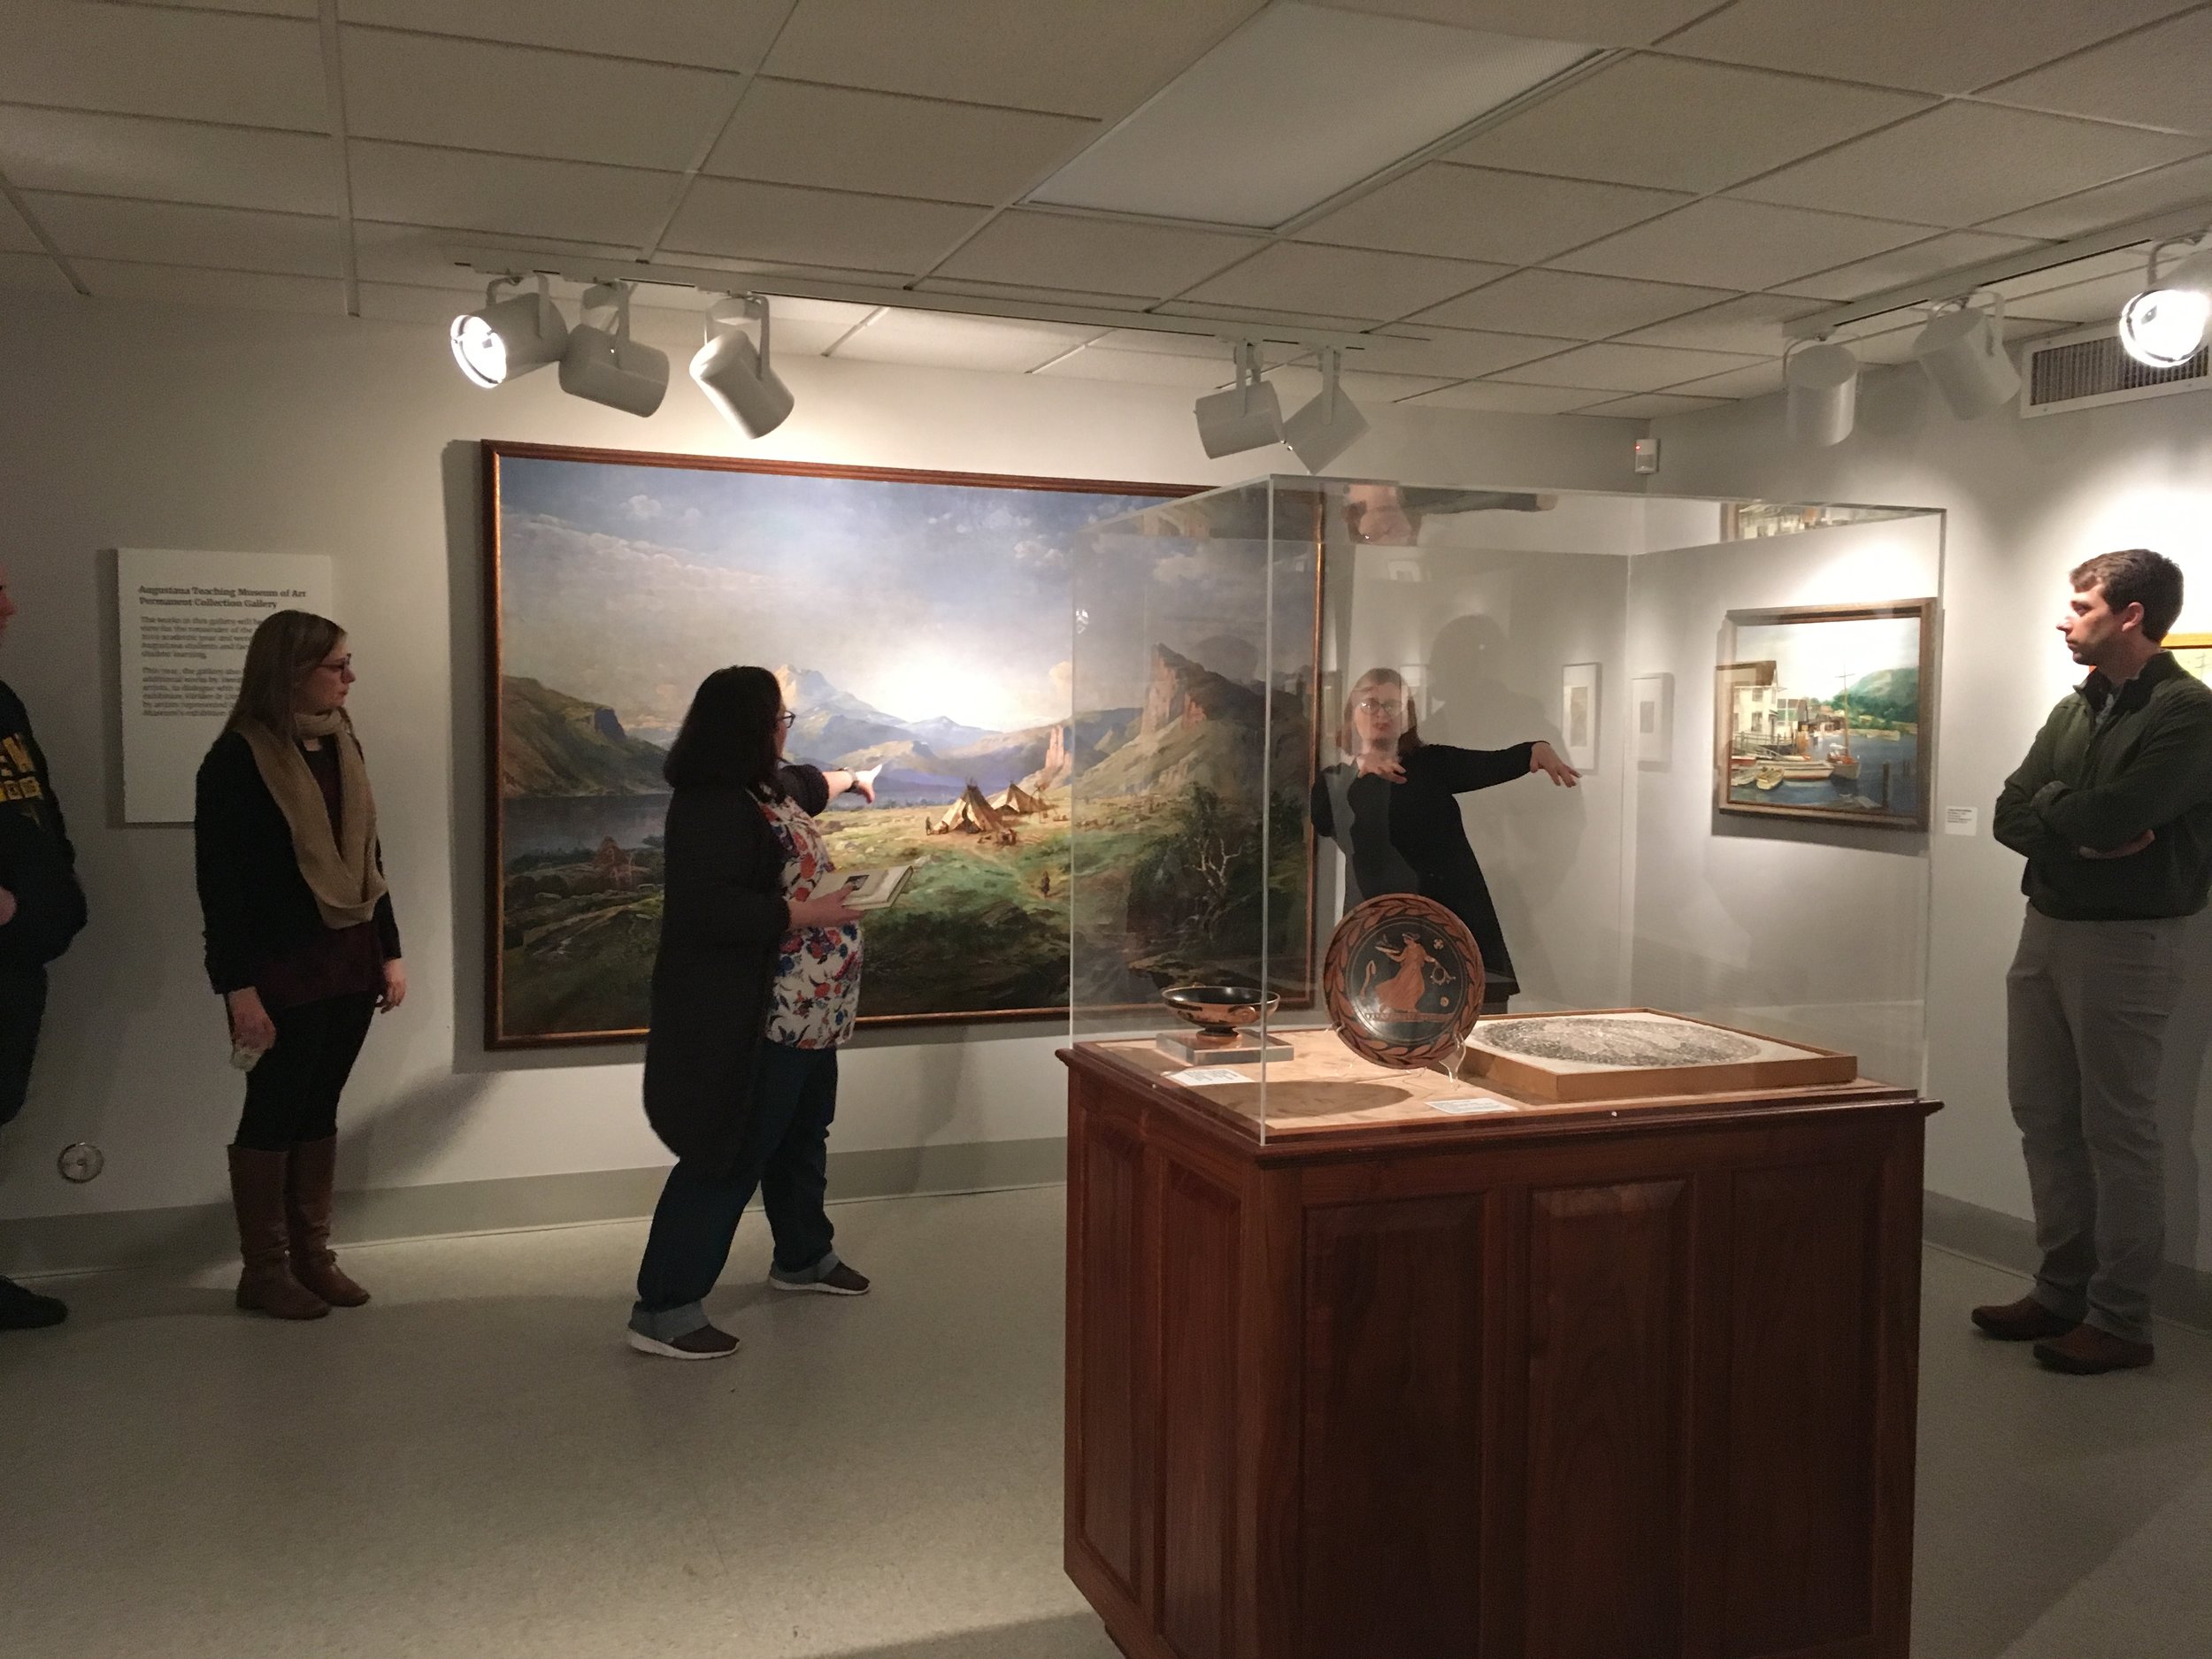  Charles Haag's Art + Archive at Augustana. Tour led by Dr. Kimberly La Palm (Scandinavian Studies) and Lisa Huntsha (Swenson Swedish Immigration Research Center). ASL interpreter: Bambi Suits. 